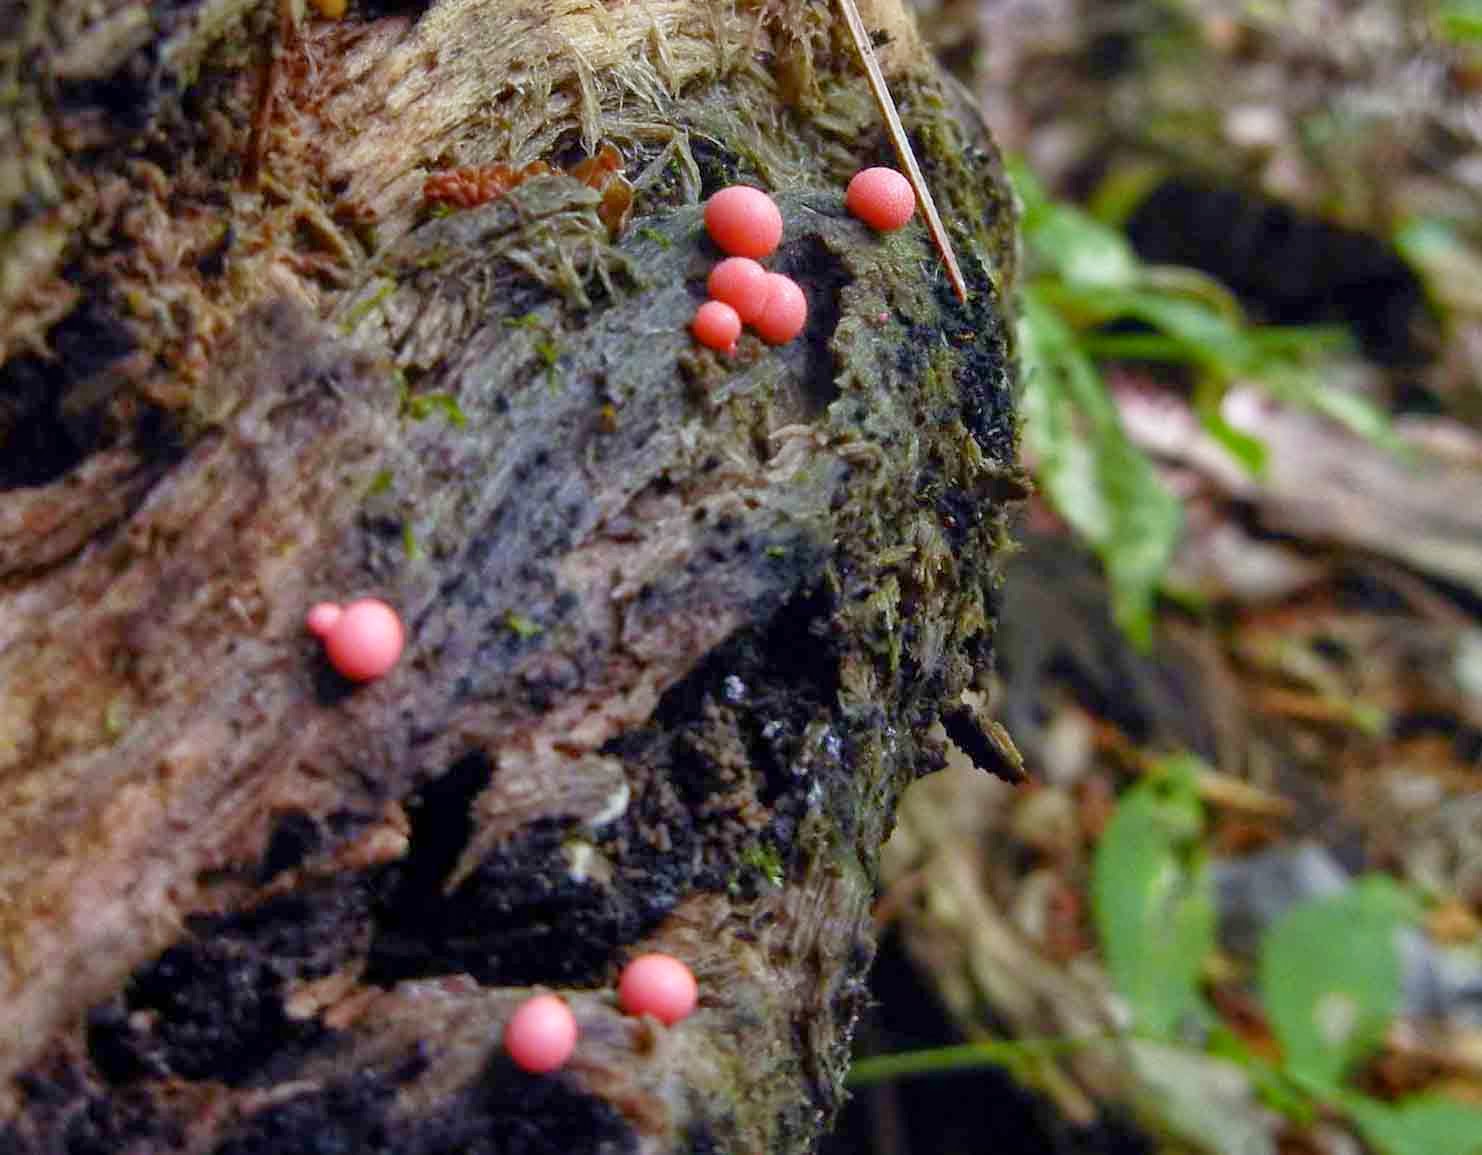 Lycogala or wolf's milk slime